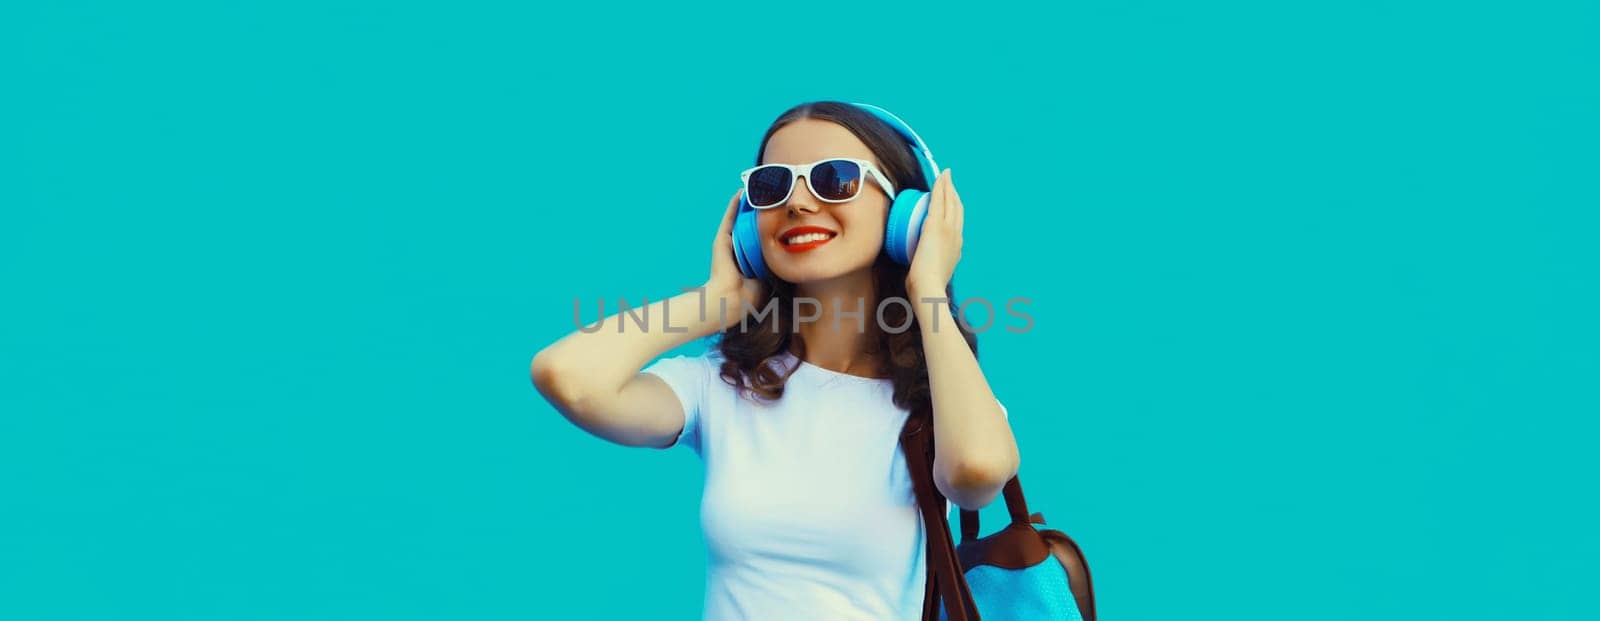 Happy modern happy young woman listening to music with headphones on blue studio background